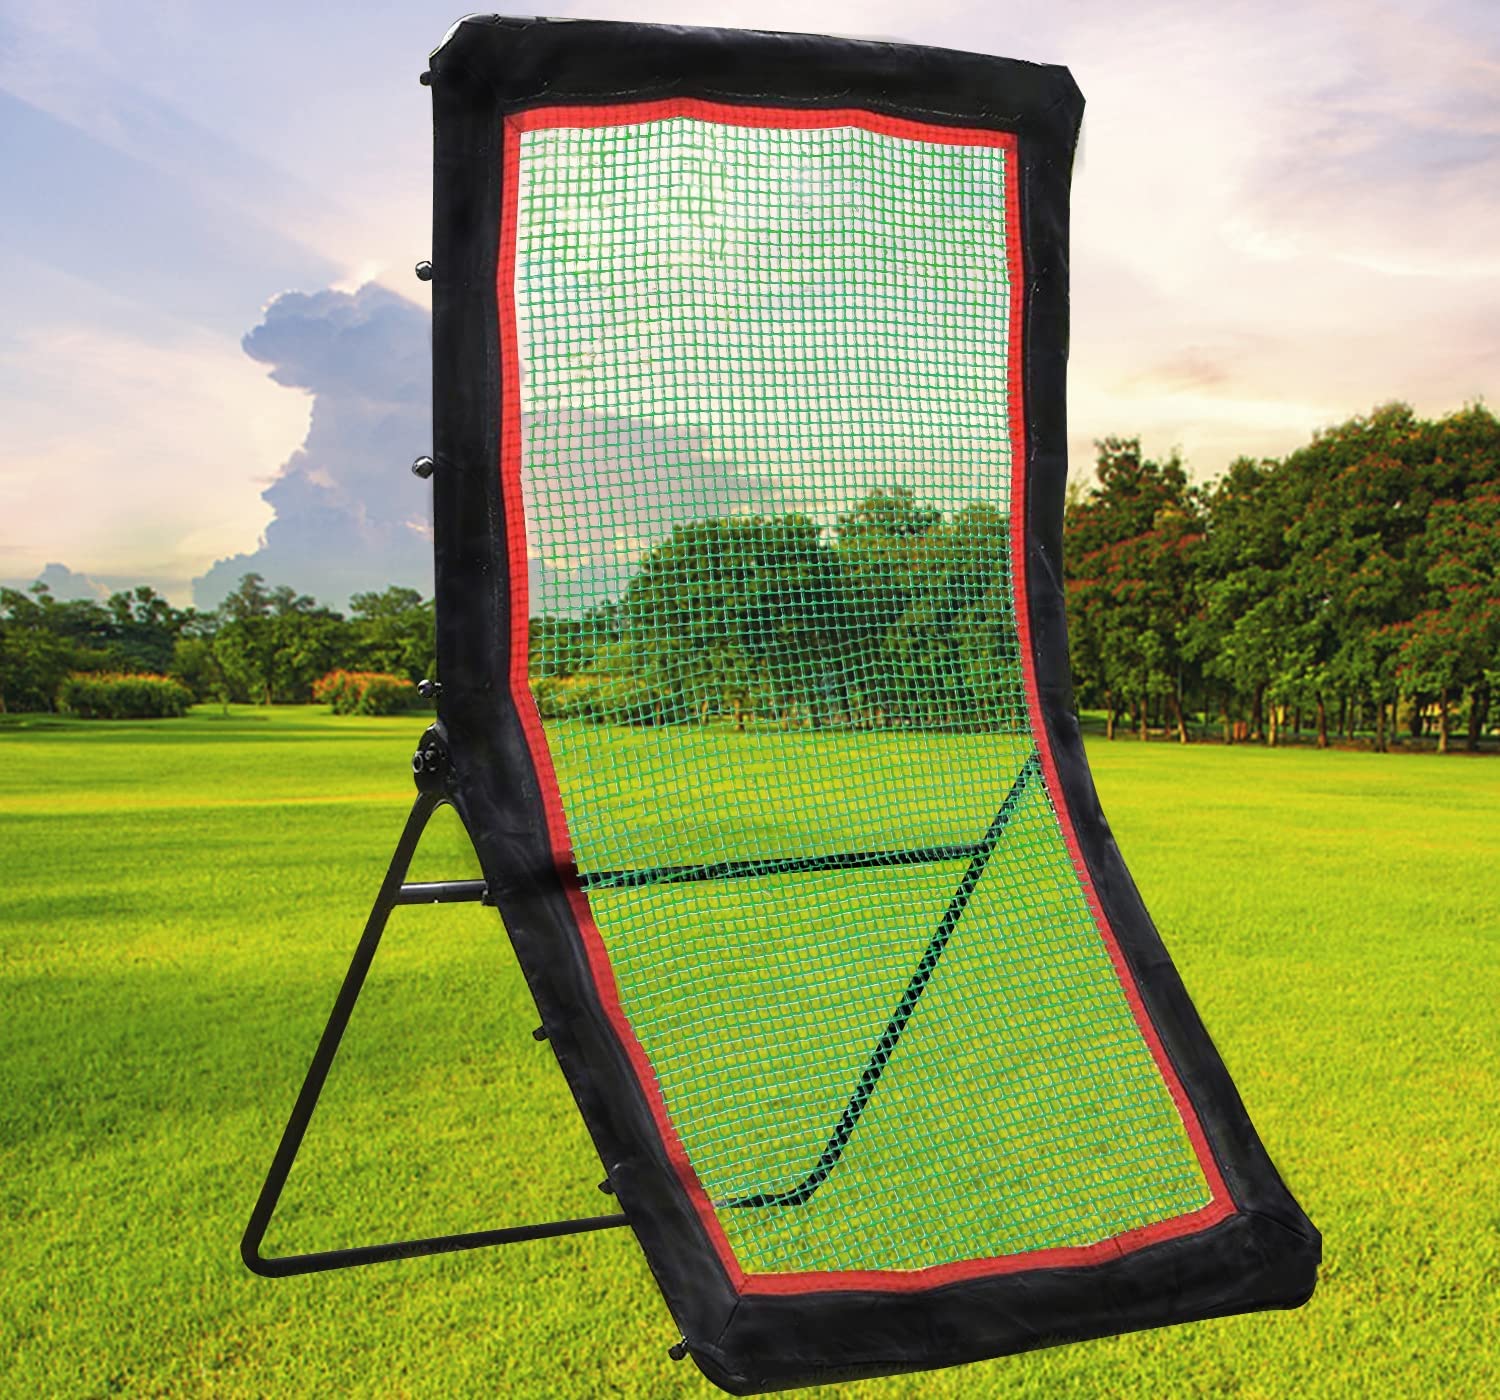 Lacrosse Rebounder, Folding Lacrosse Bounceback/Return Net, Thickened Rebounder Wall Target Cloth with Front and Back Extra Pitchback Netting